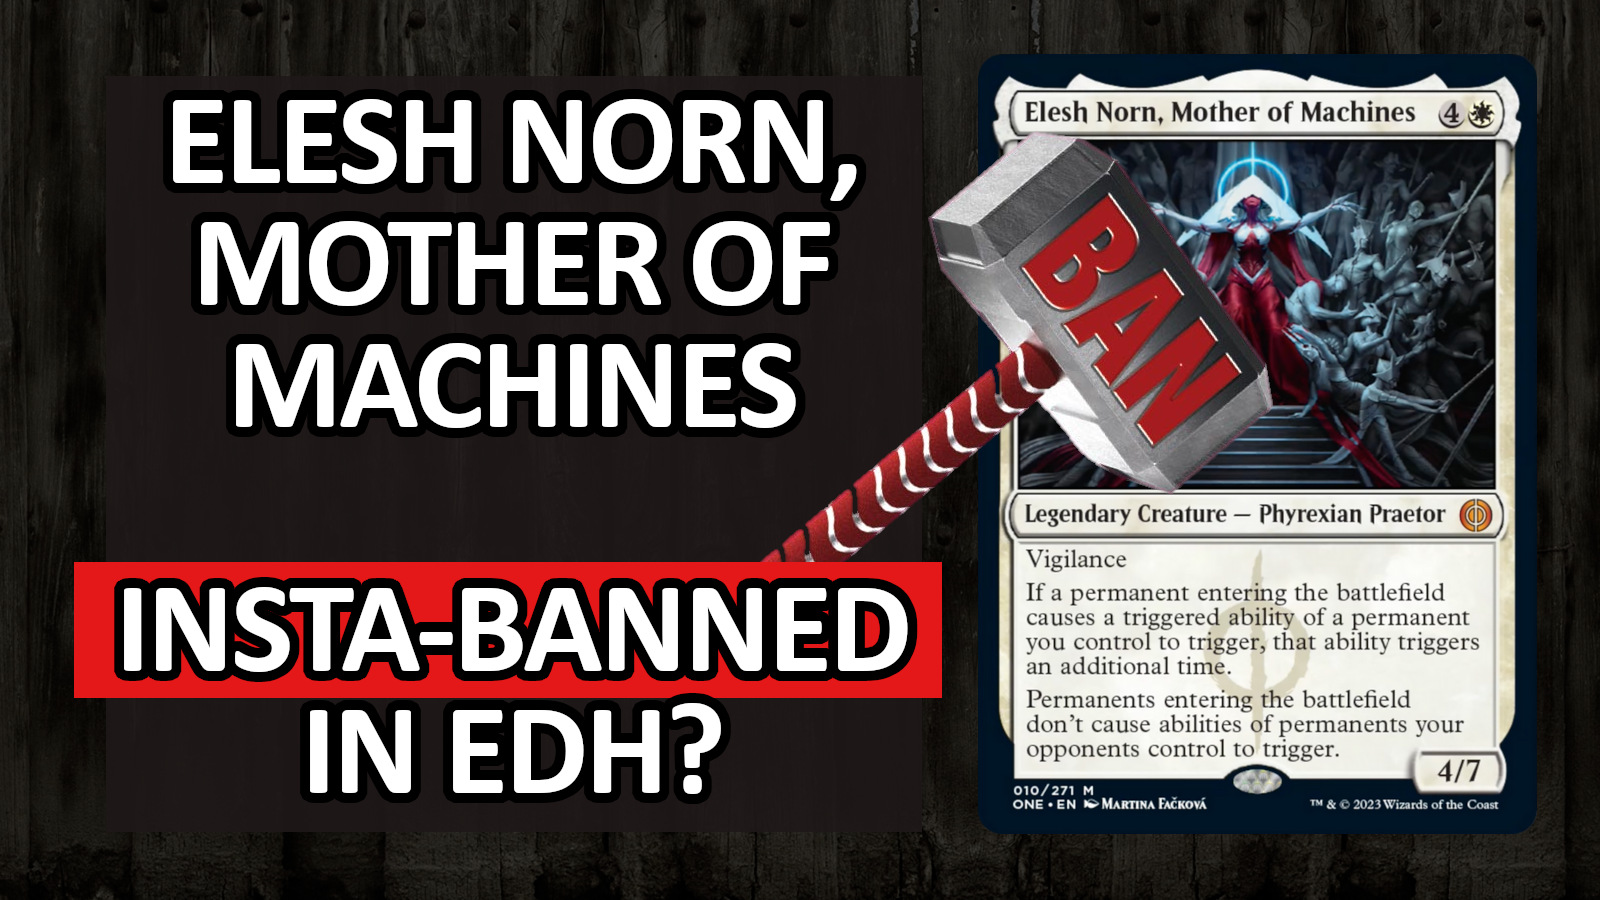 Article : Elesh Norn, Mother of Machines - Is she a problem in EDH?